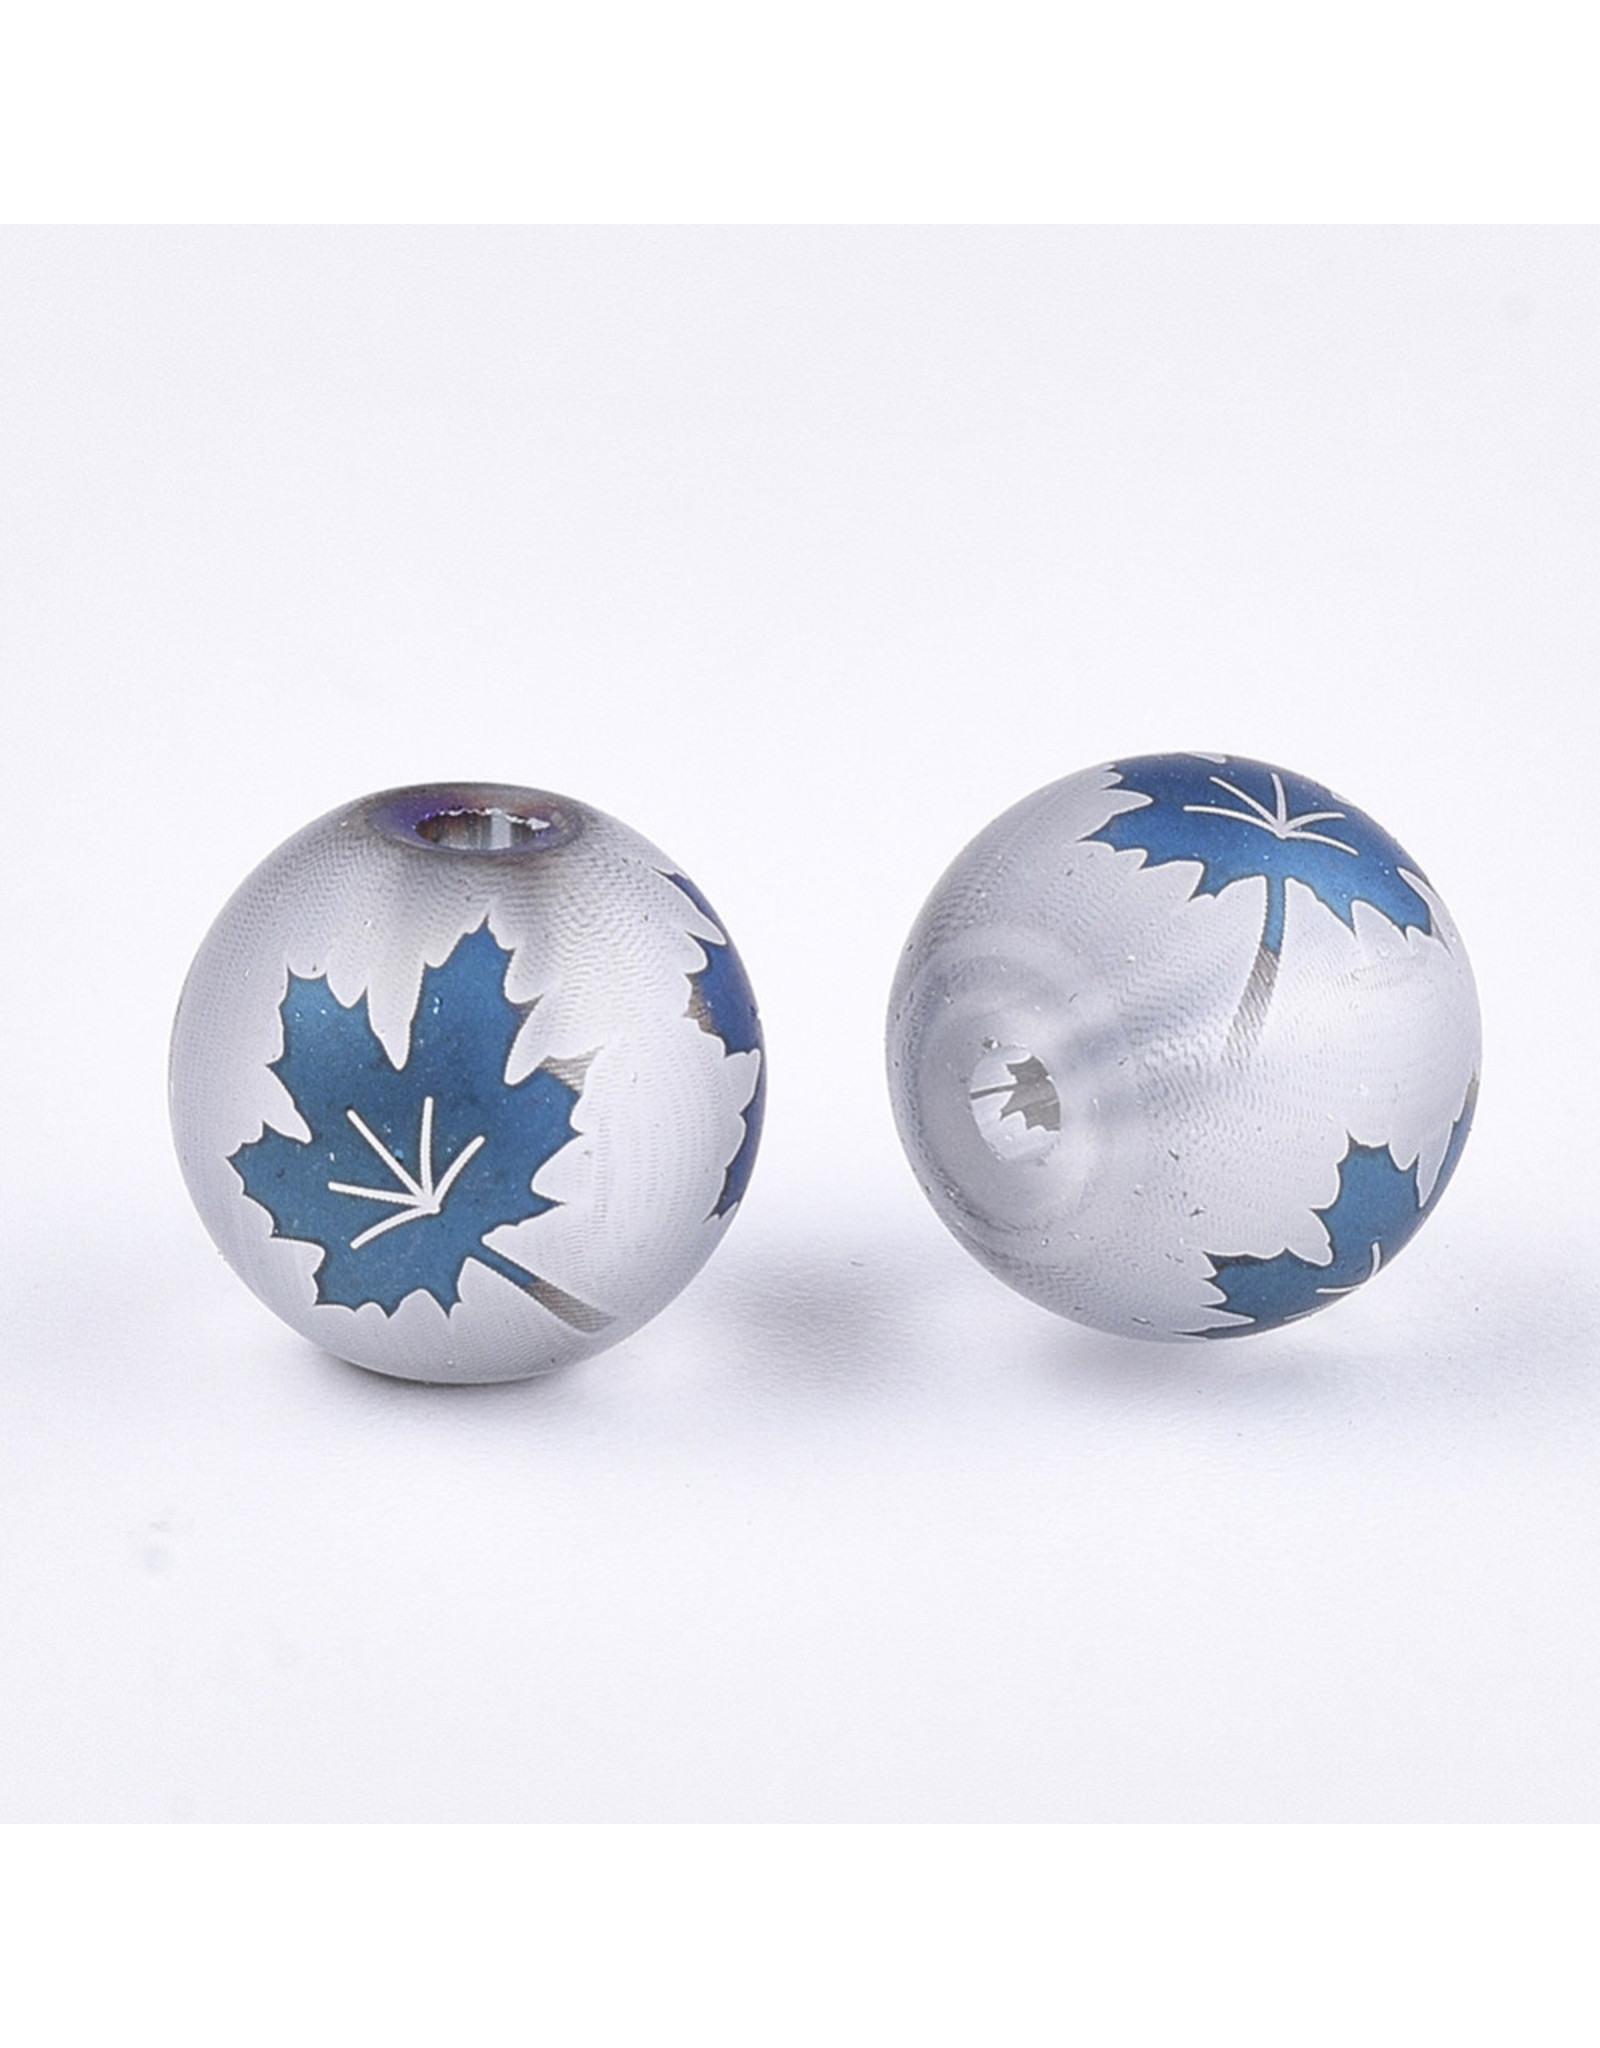 Round 8mm Clear Matte with Blue Maple Leaf x10